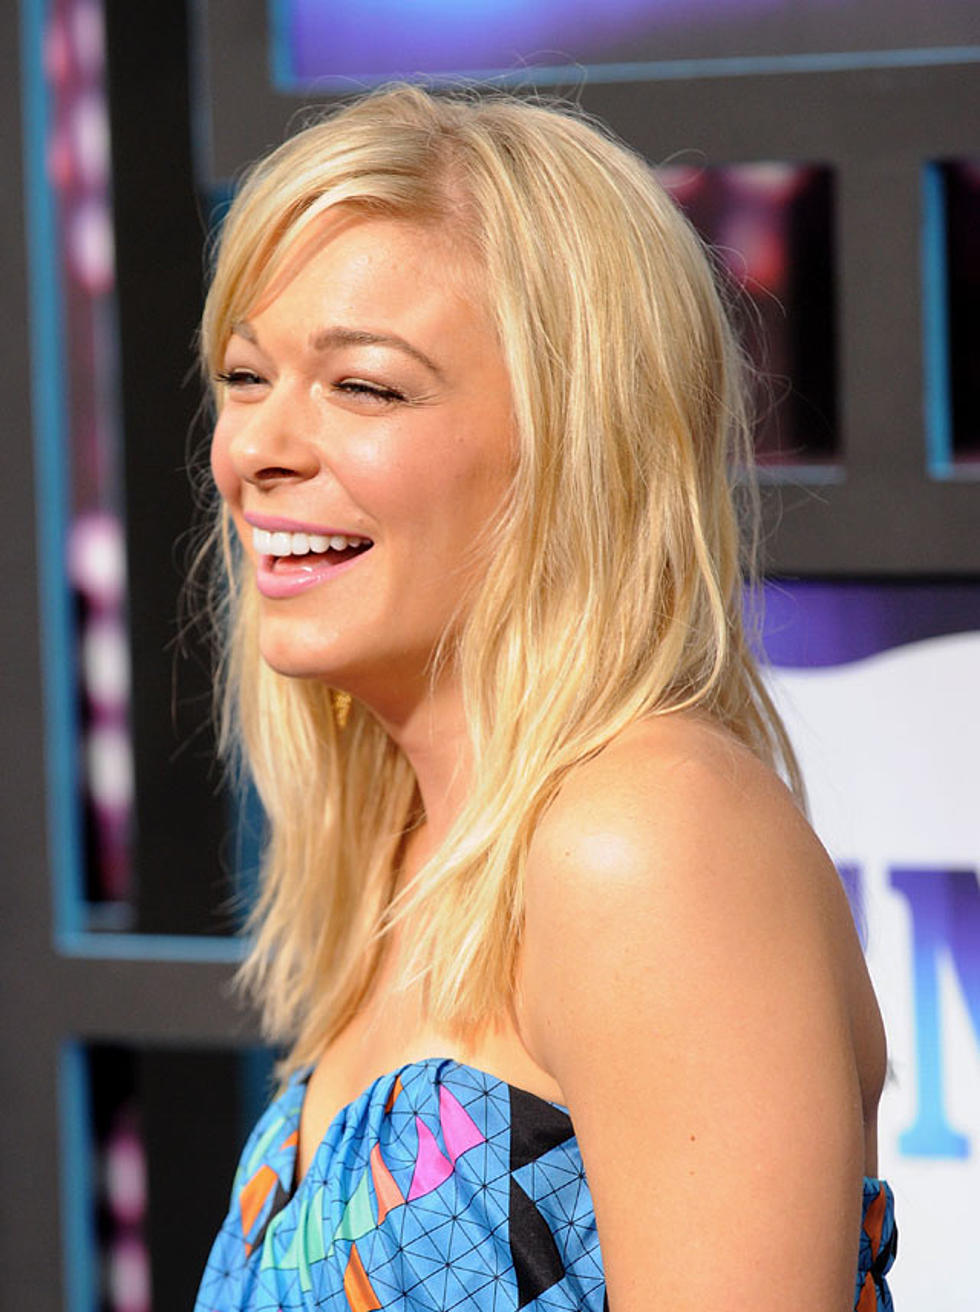 LeAnn Rimes Says She Is Not Addicted To Twitter [VIDEO &#8211; INTERVIEW]